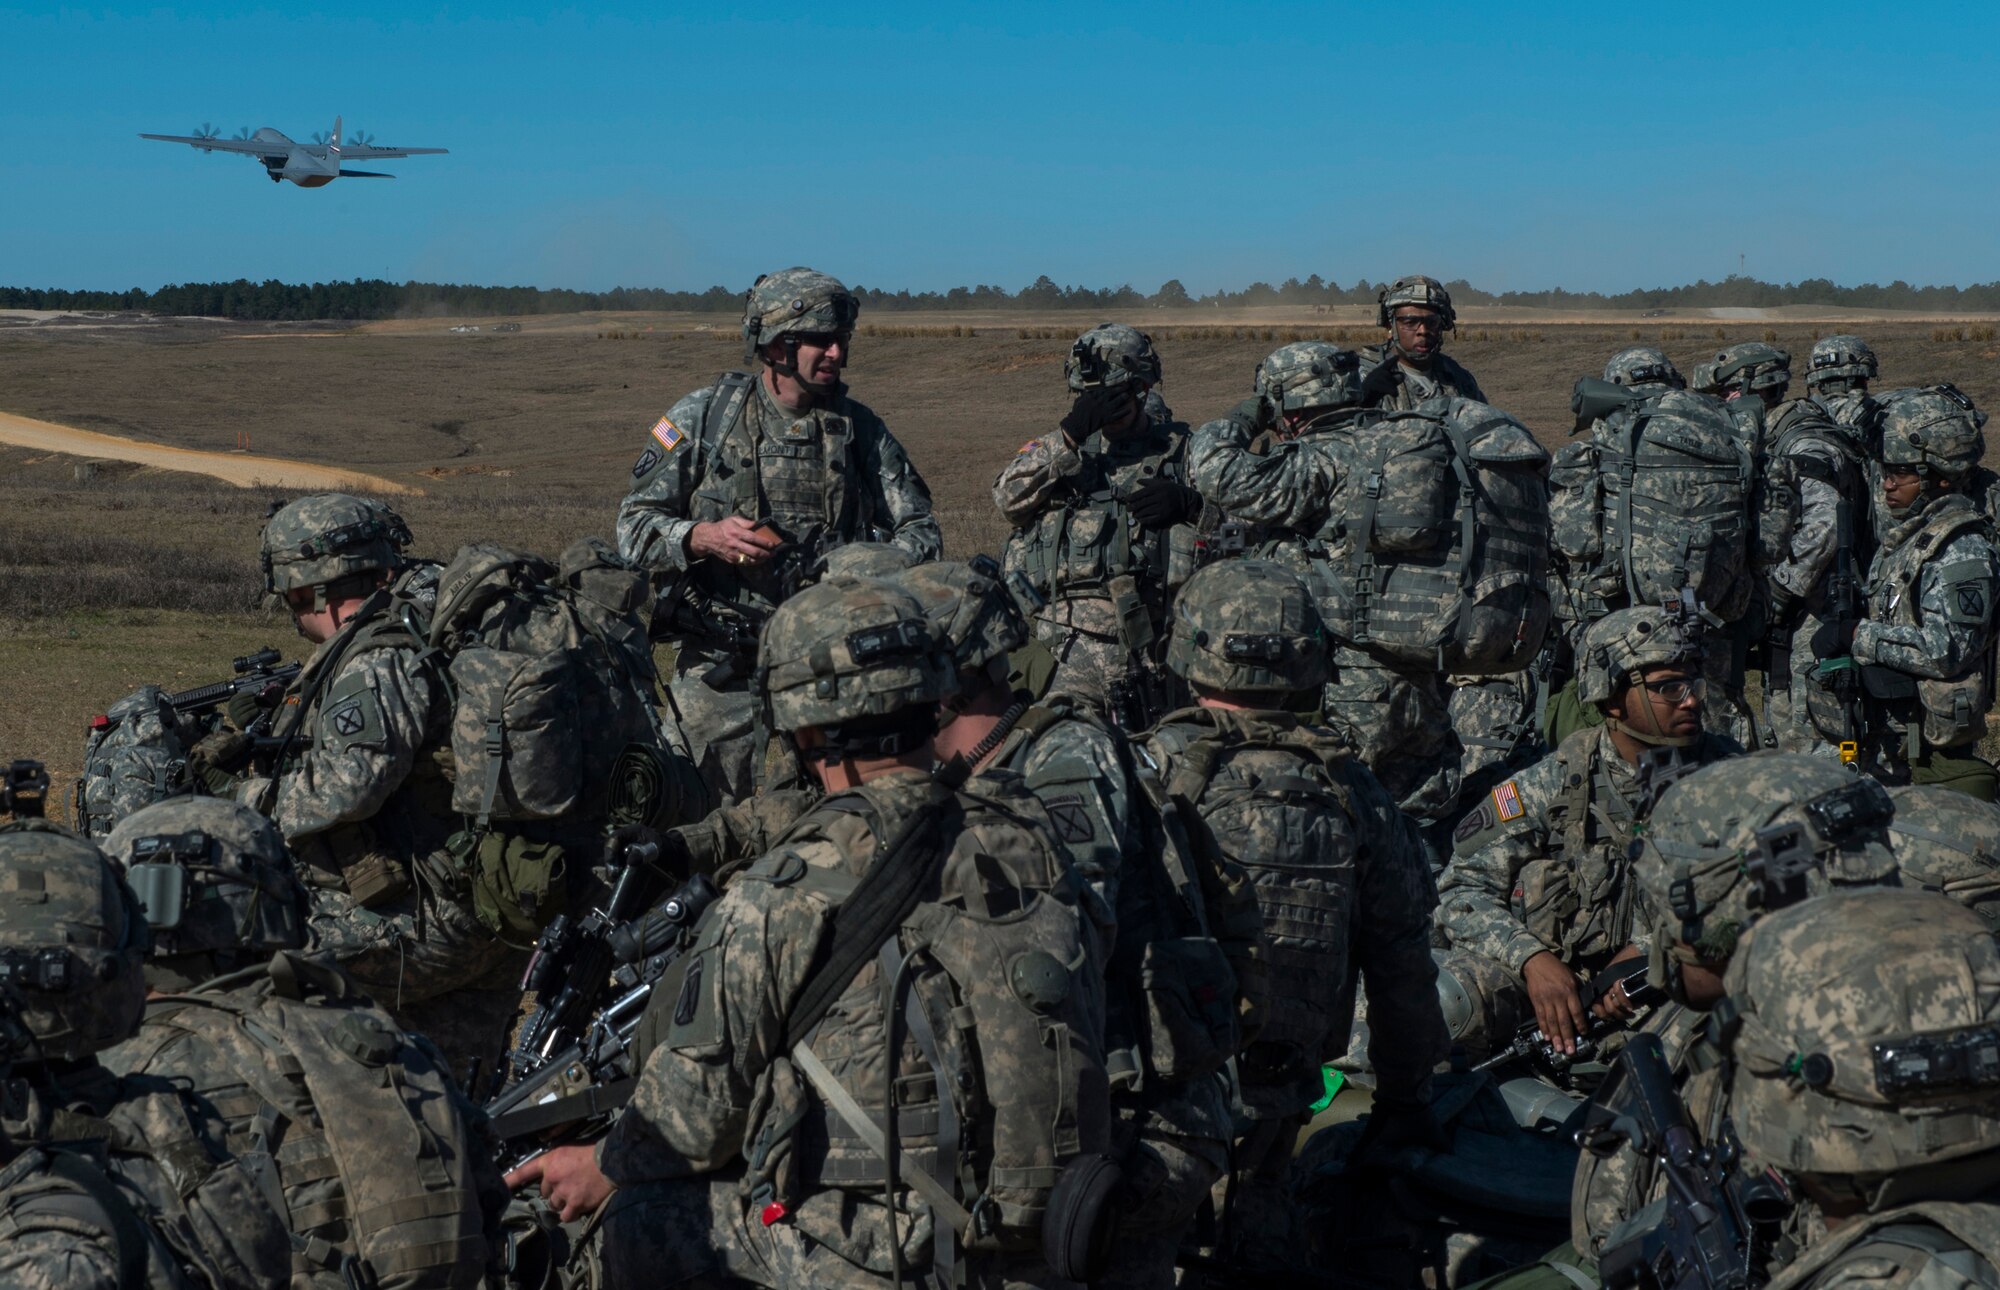 Members of the U.S. Army 1st Brigade 10th Mountain Division stationed at Fort Drum, N.Y., conduct training as a C-130 Hercules takes off during an exercise at a the Joint Readiness Training Center at Fort Polk, La., Jan. 18, 2015. JRTC is a 34th Combat Training Squadron exercise for the U.S. Army that improves unit readiness by providing realistic, stressful, joint and combined arms training across the full spectrum of conflict.  (U.S. Air Force photo/Staff Sgt. Gustavo Gonzalez/RELEASED)